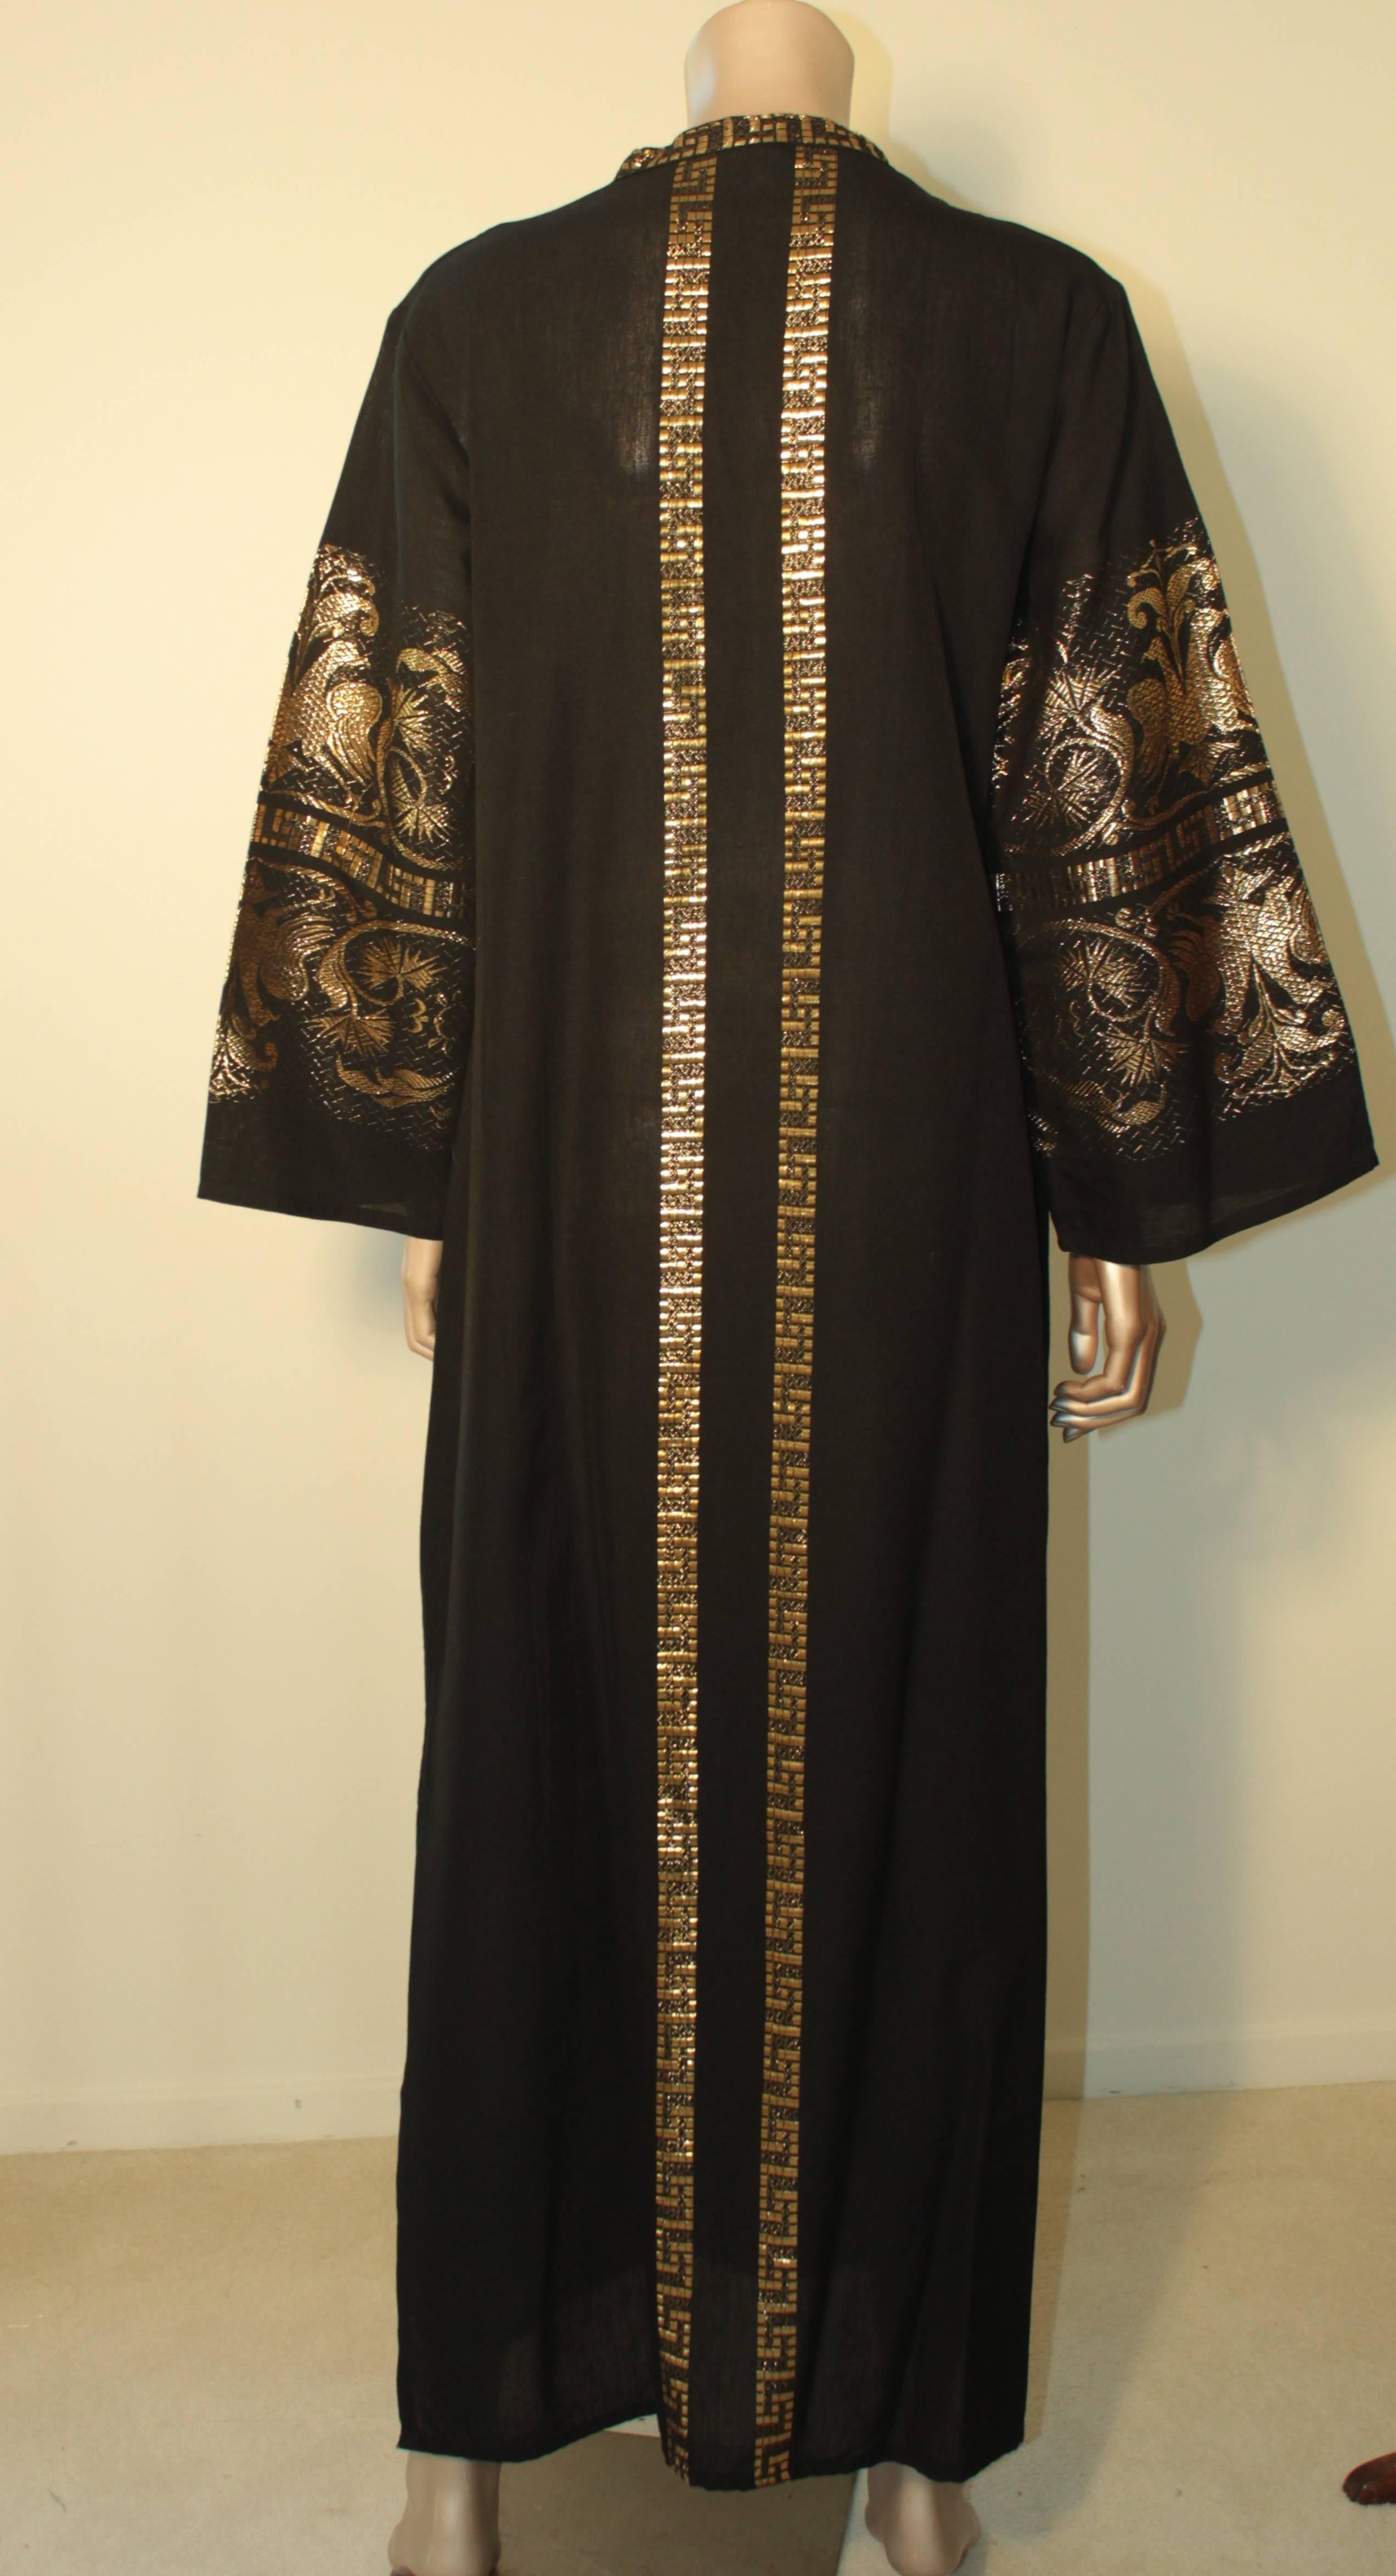 Hand-Crafted Caftan Black and Gold, 1970s, Maxi Dress Greek Kaftan Size M to L